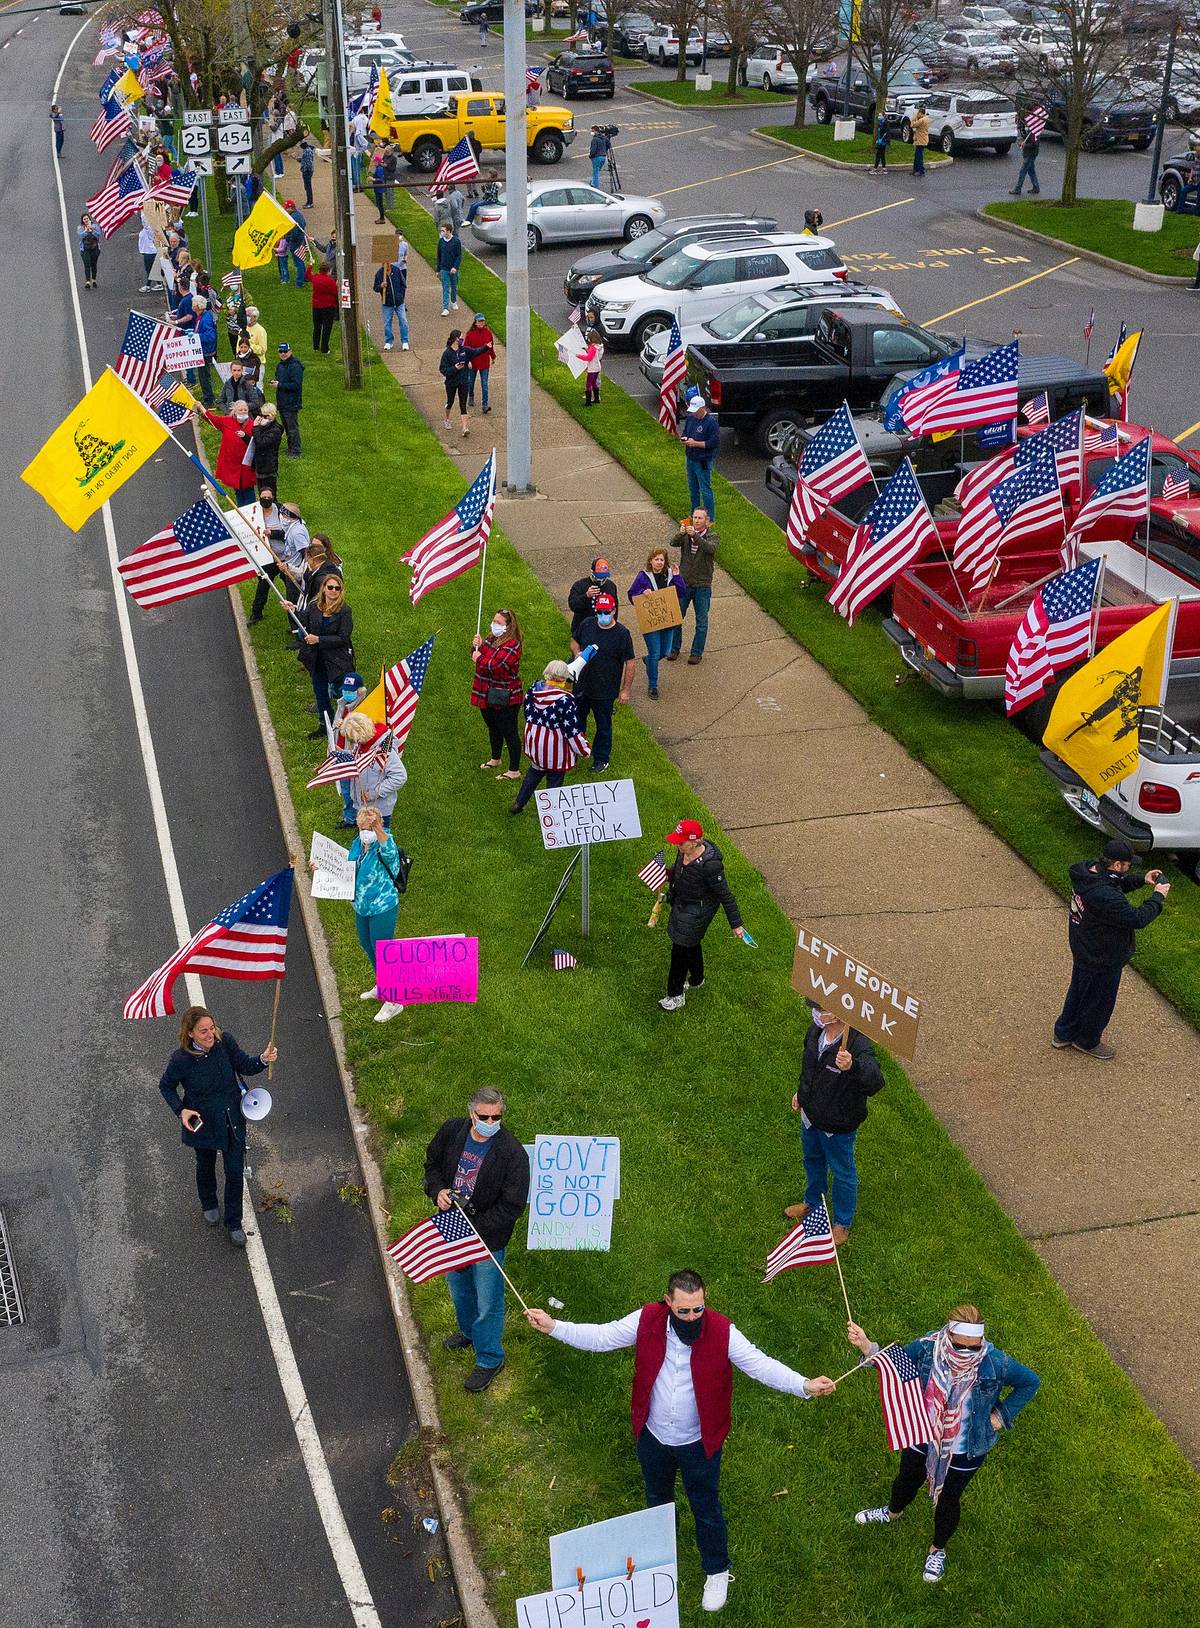 May Day Freedom Rally, May 1, 2020, in Commack, New York